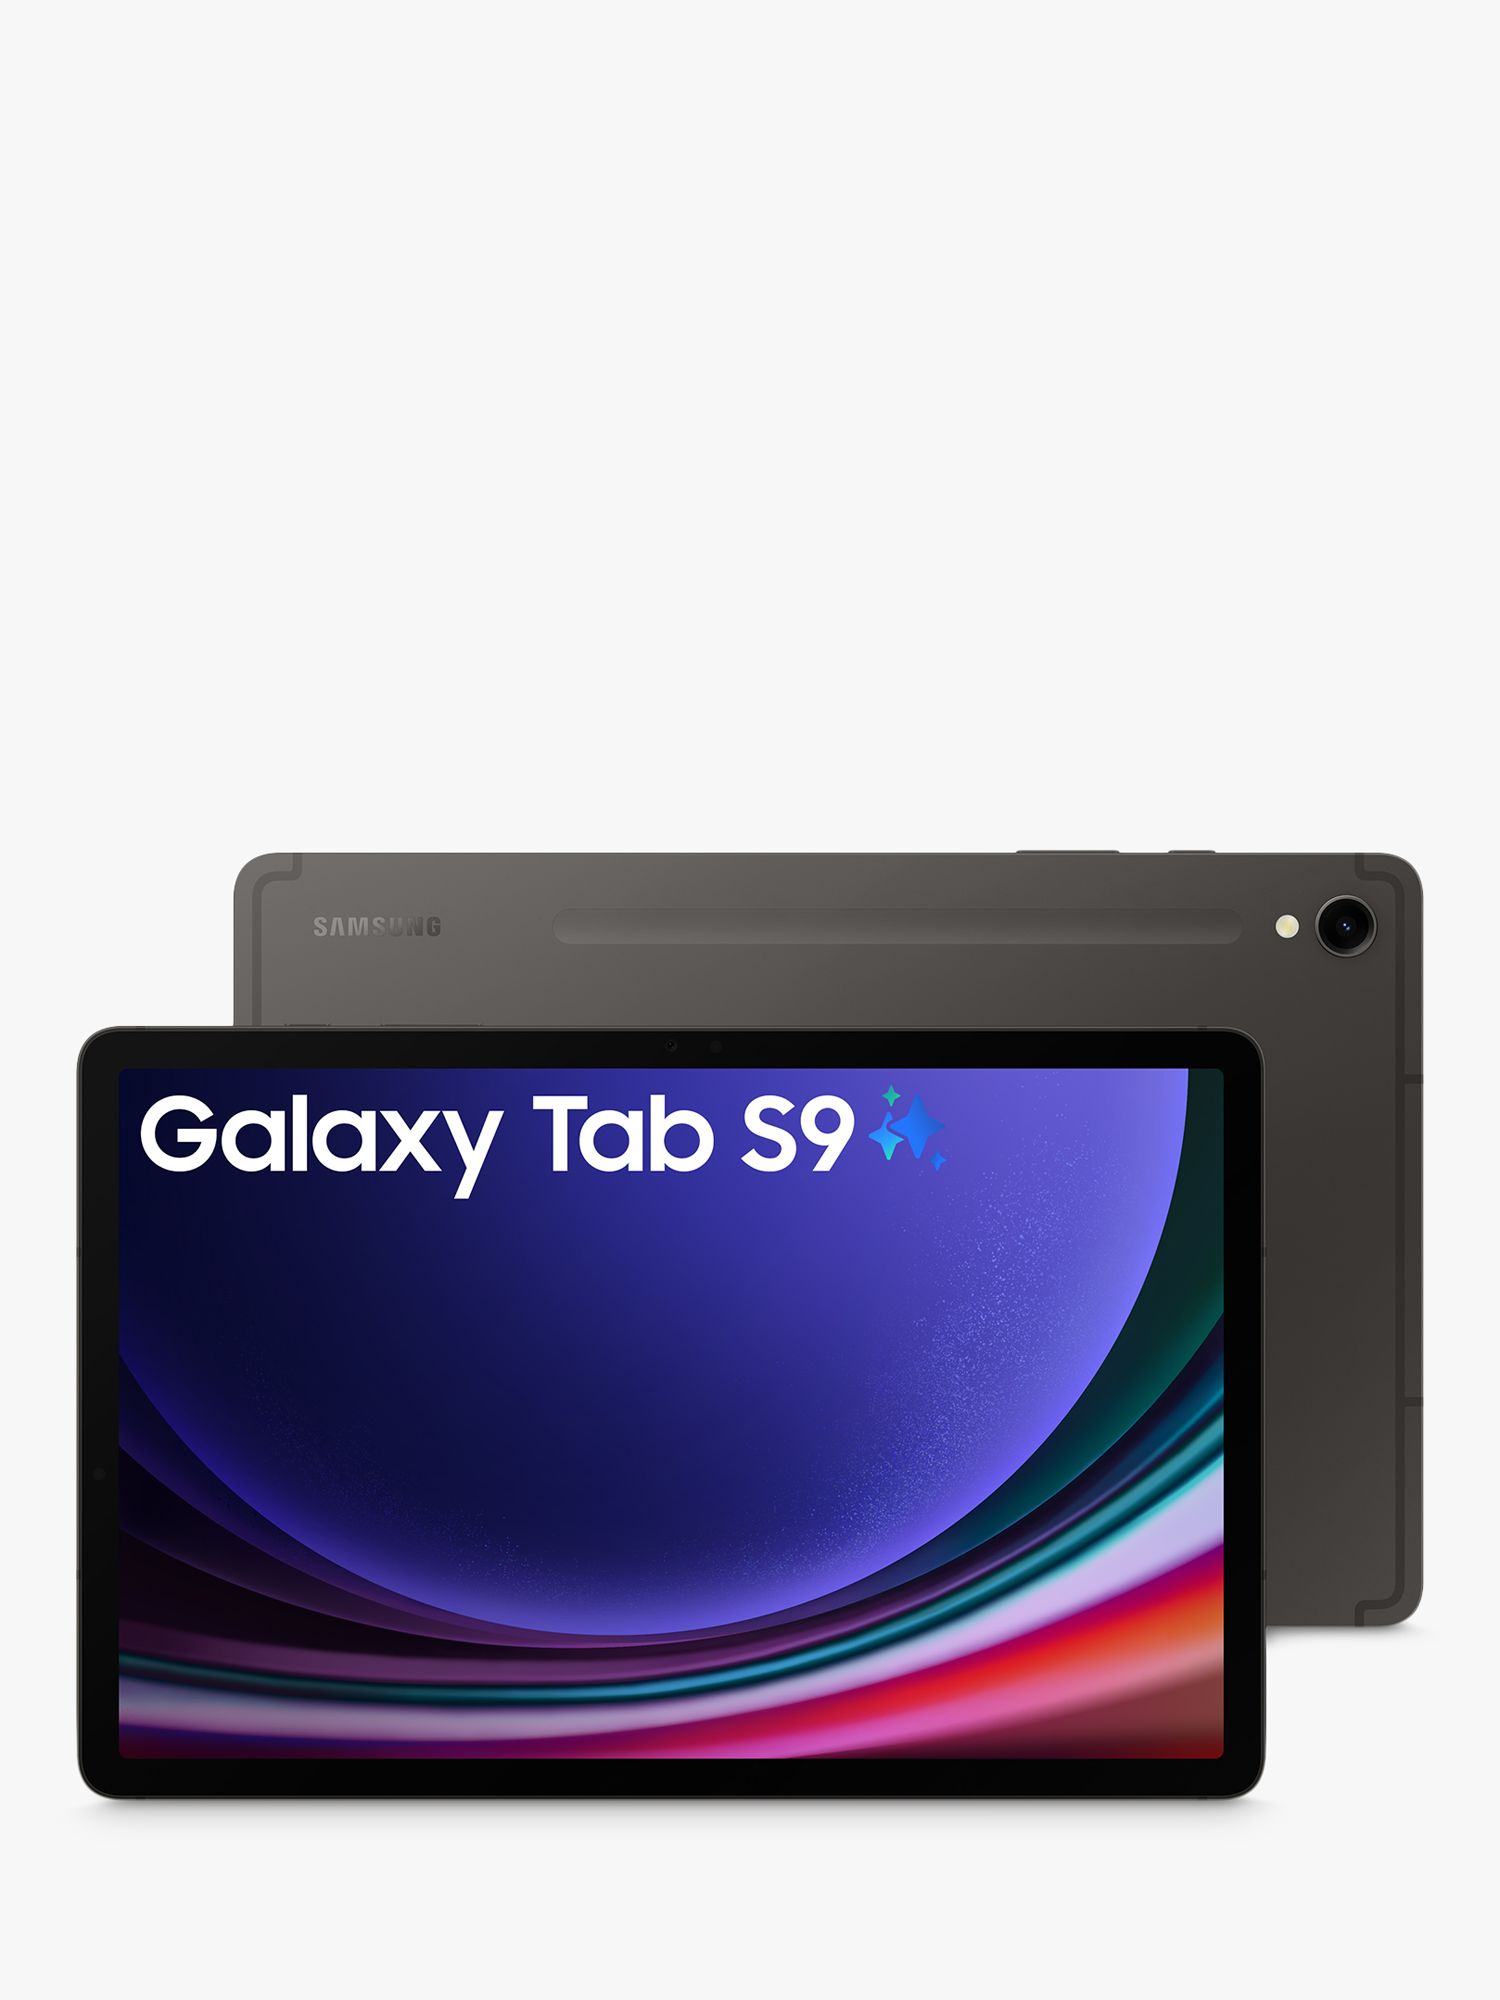 First Look: Samsung's Galaxy Tab S9 Series Goes All-In on OLED